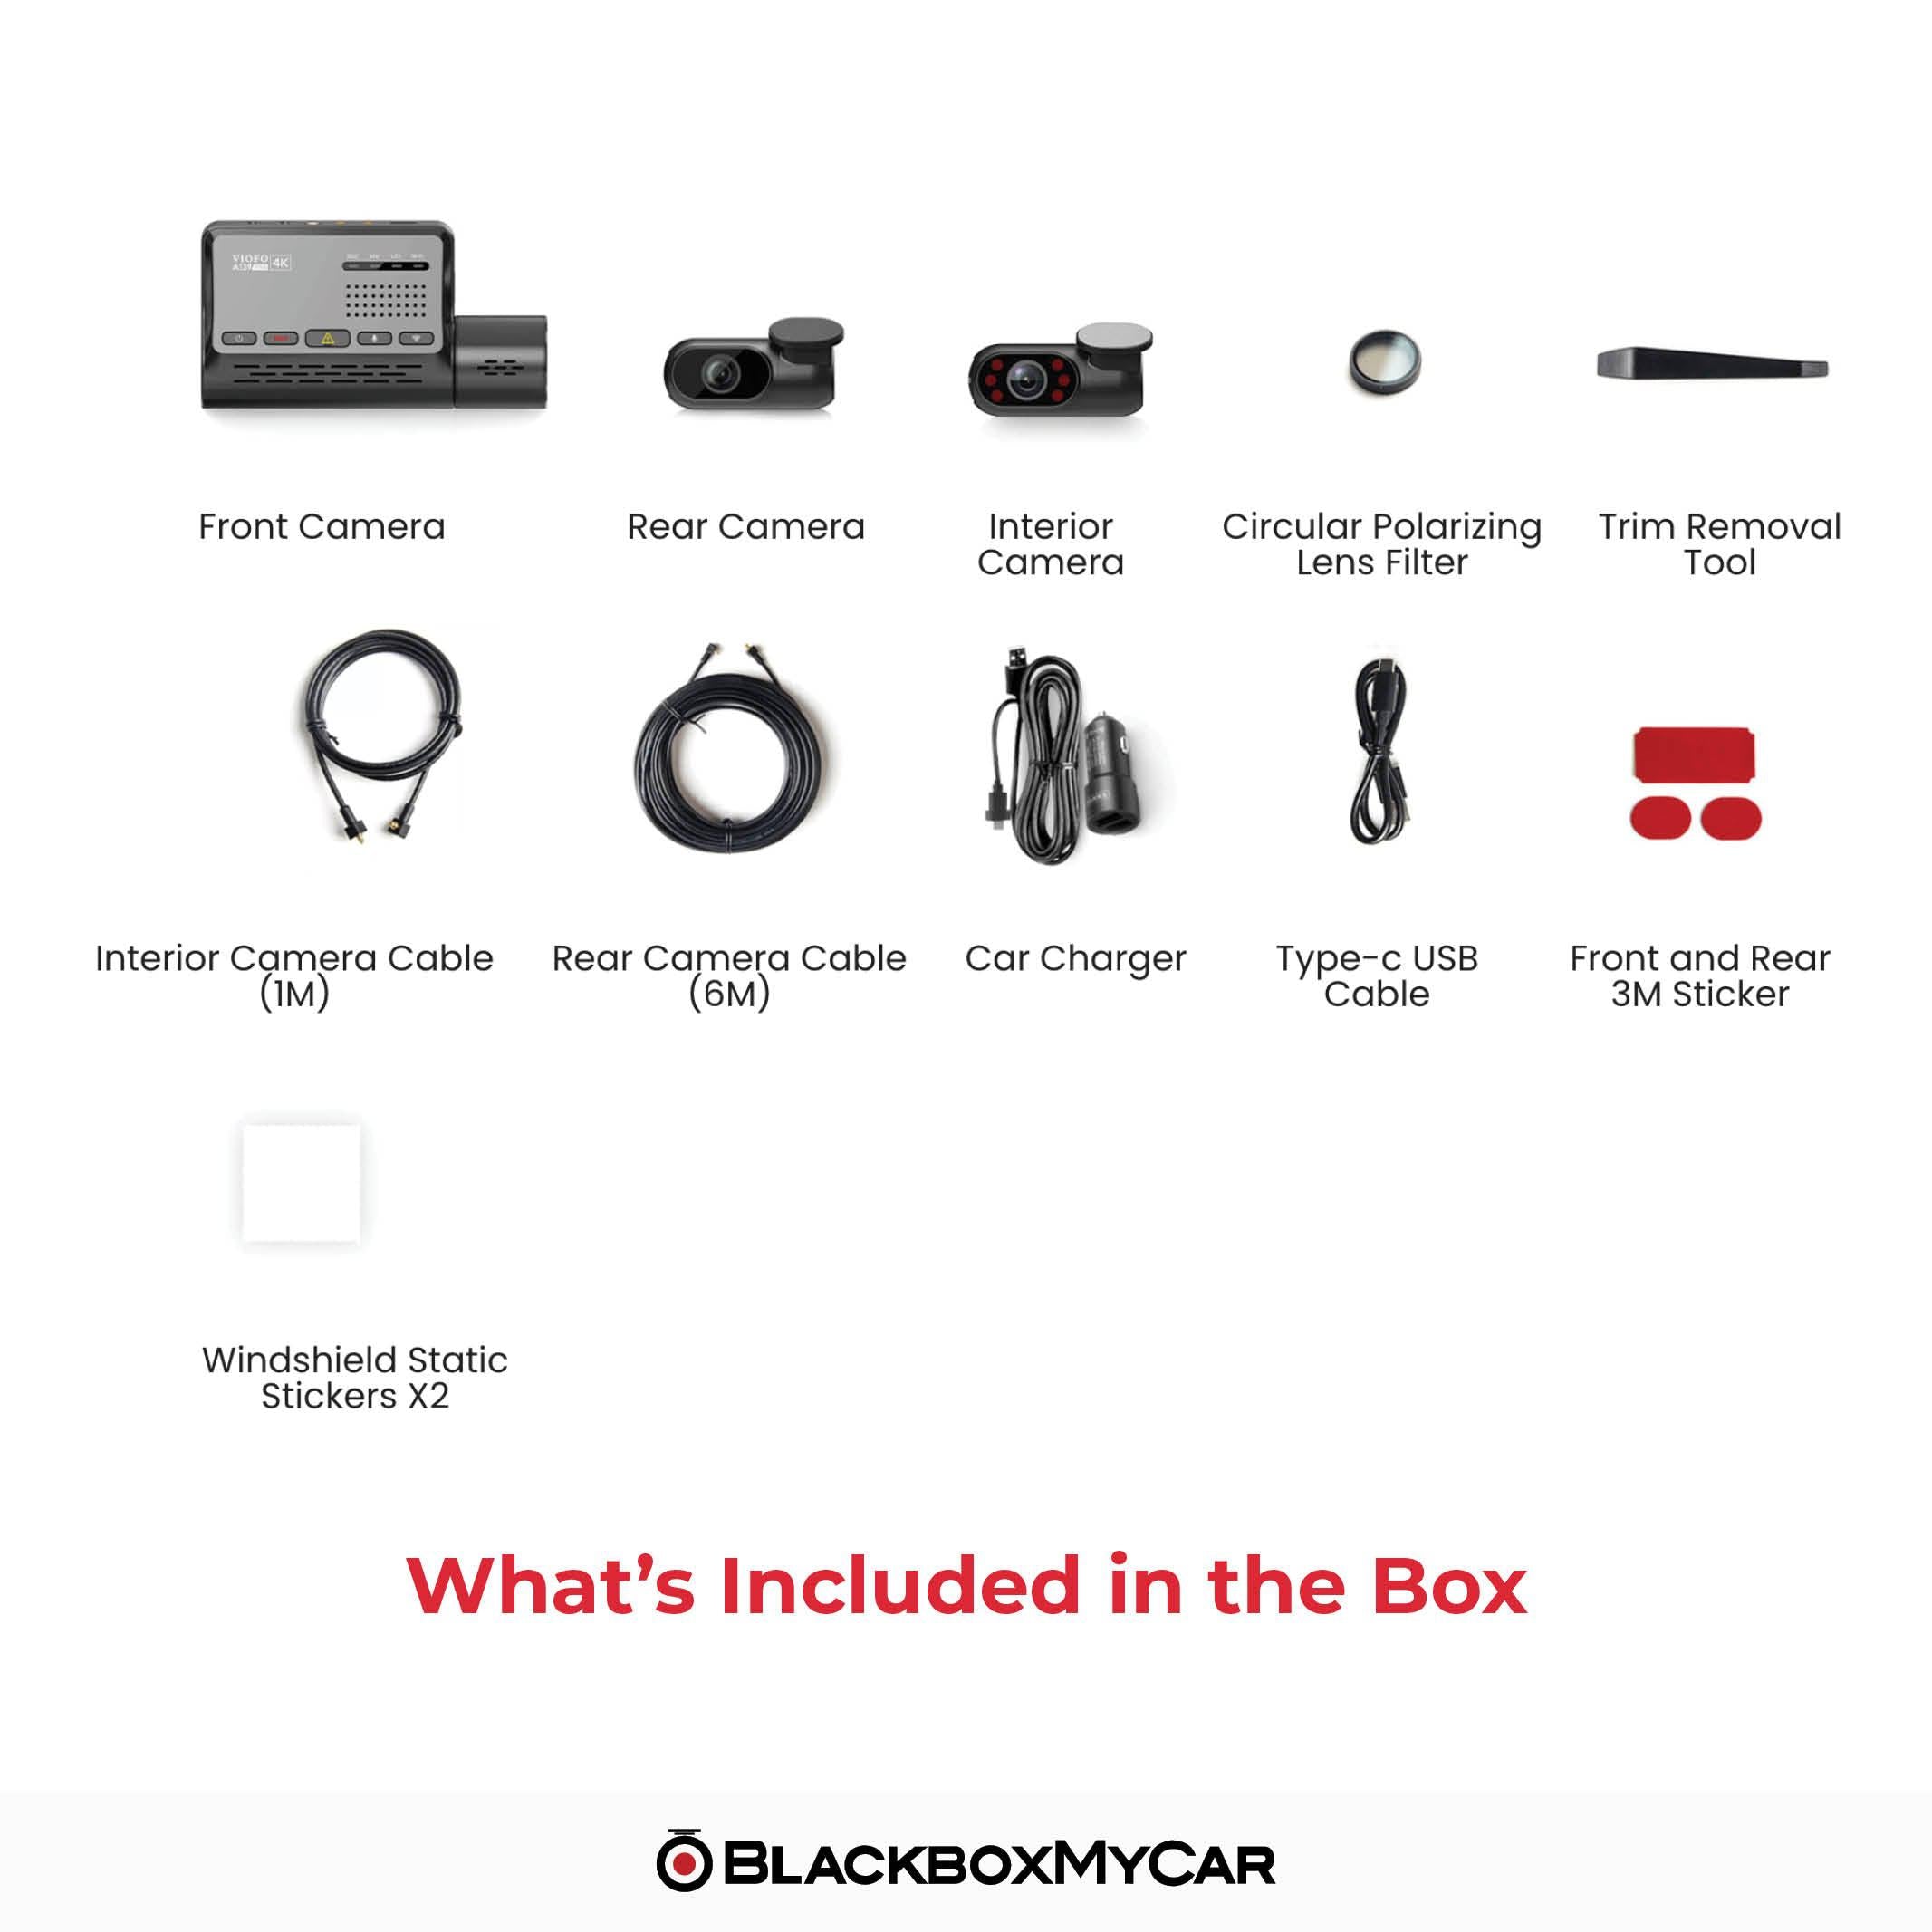 Dashboard cam • Compare (16 products) see prices »